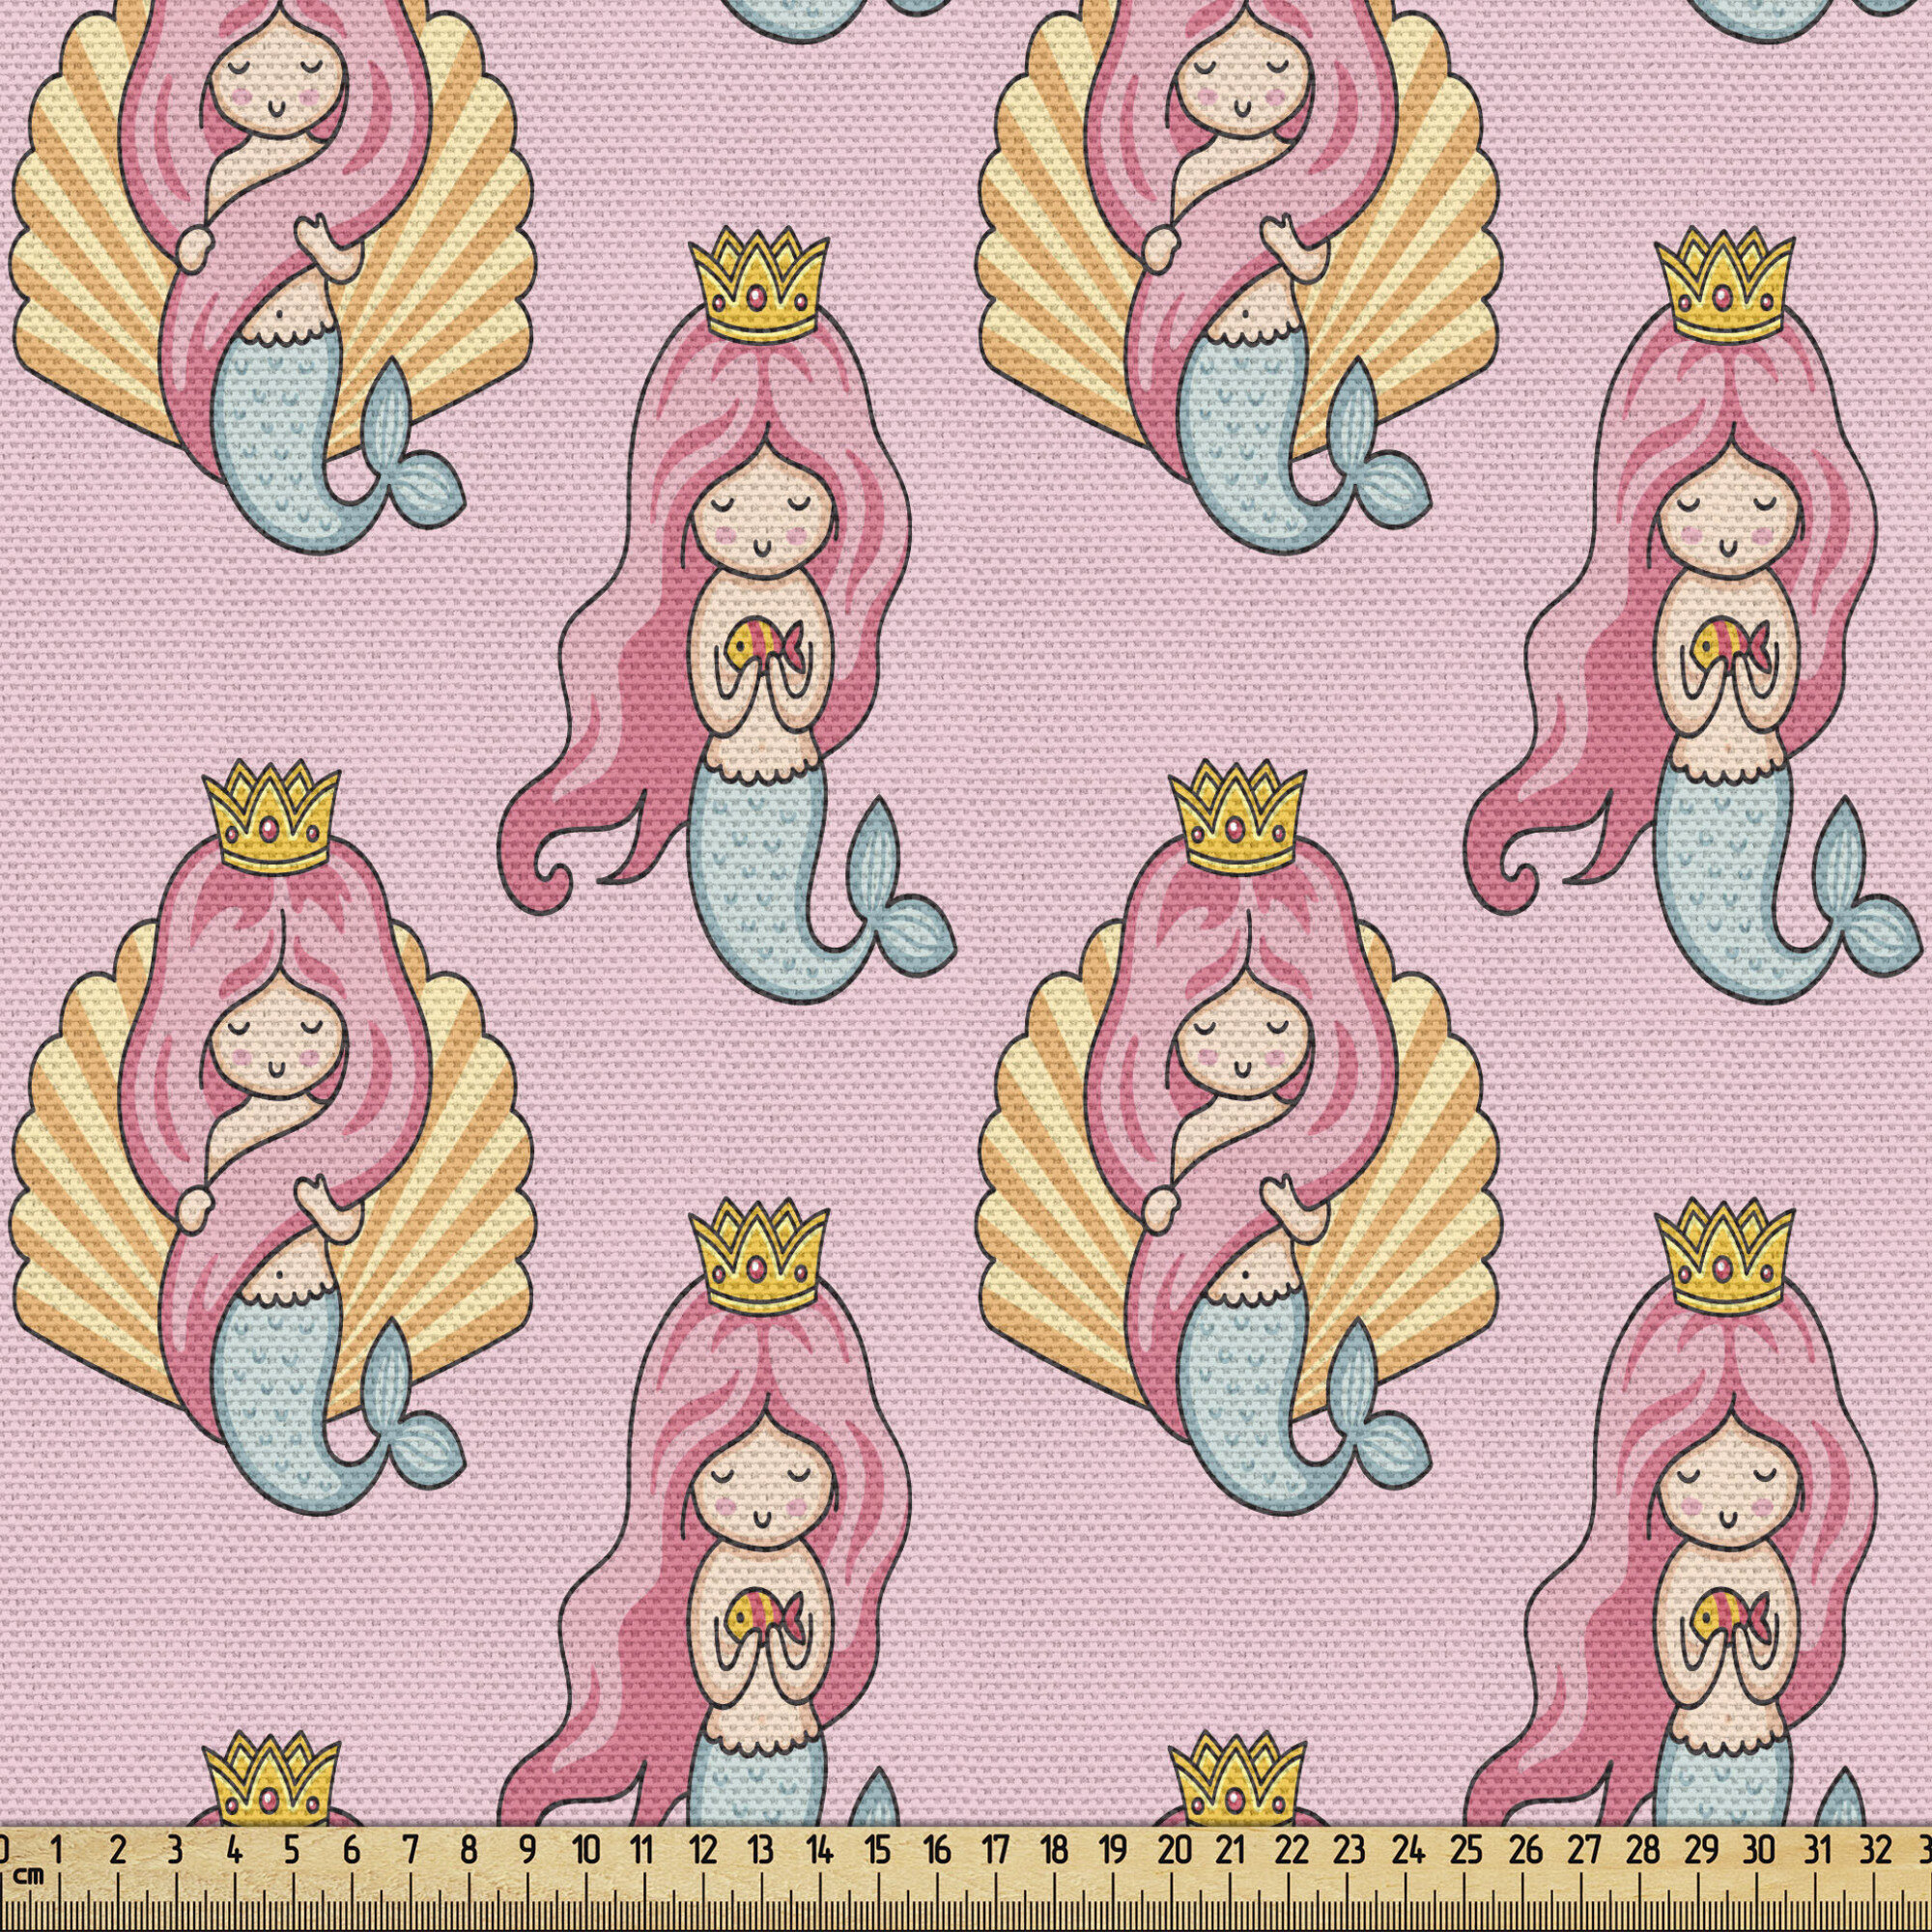 East Urban Home fab_175040_Ambesonne Crown Fabric By The Yard, Cartoon  Style Queen Mermaids Along Lengthy Hair Fish Tail And Shell On Back,  Decorative Fabric For Upholstery And Home Accents, Pale Pink Multicolor |